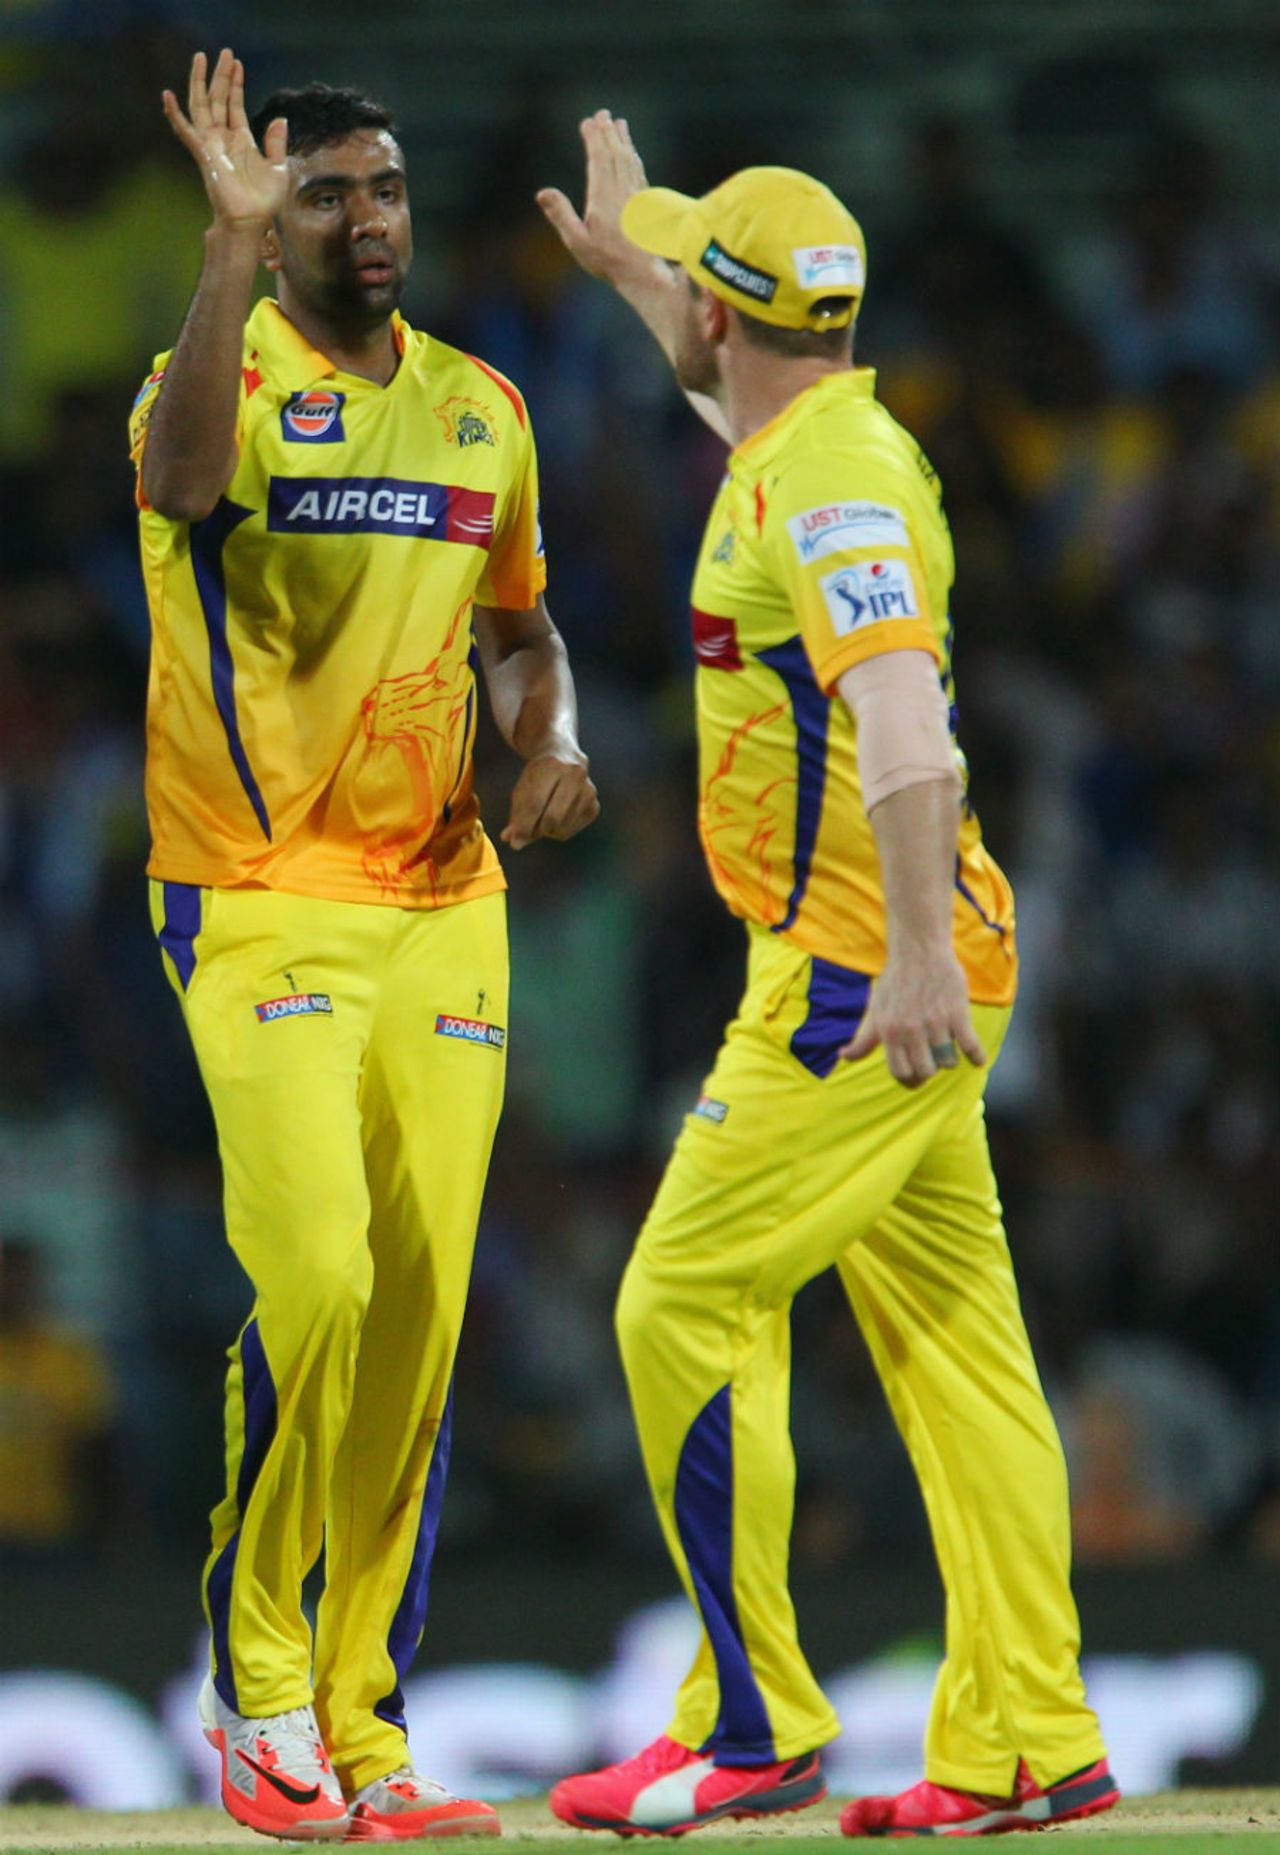 R Ashwin stifled the opposition with his offspin, Chennai Super Kings v Sunrisers Hyderabad, IPL 2015, Chennai, April 11, 2015